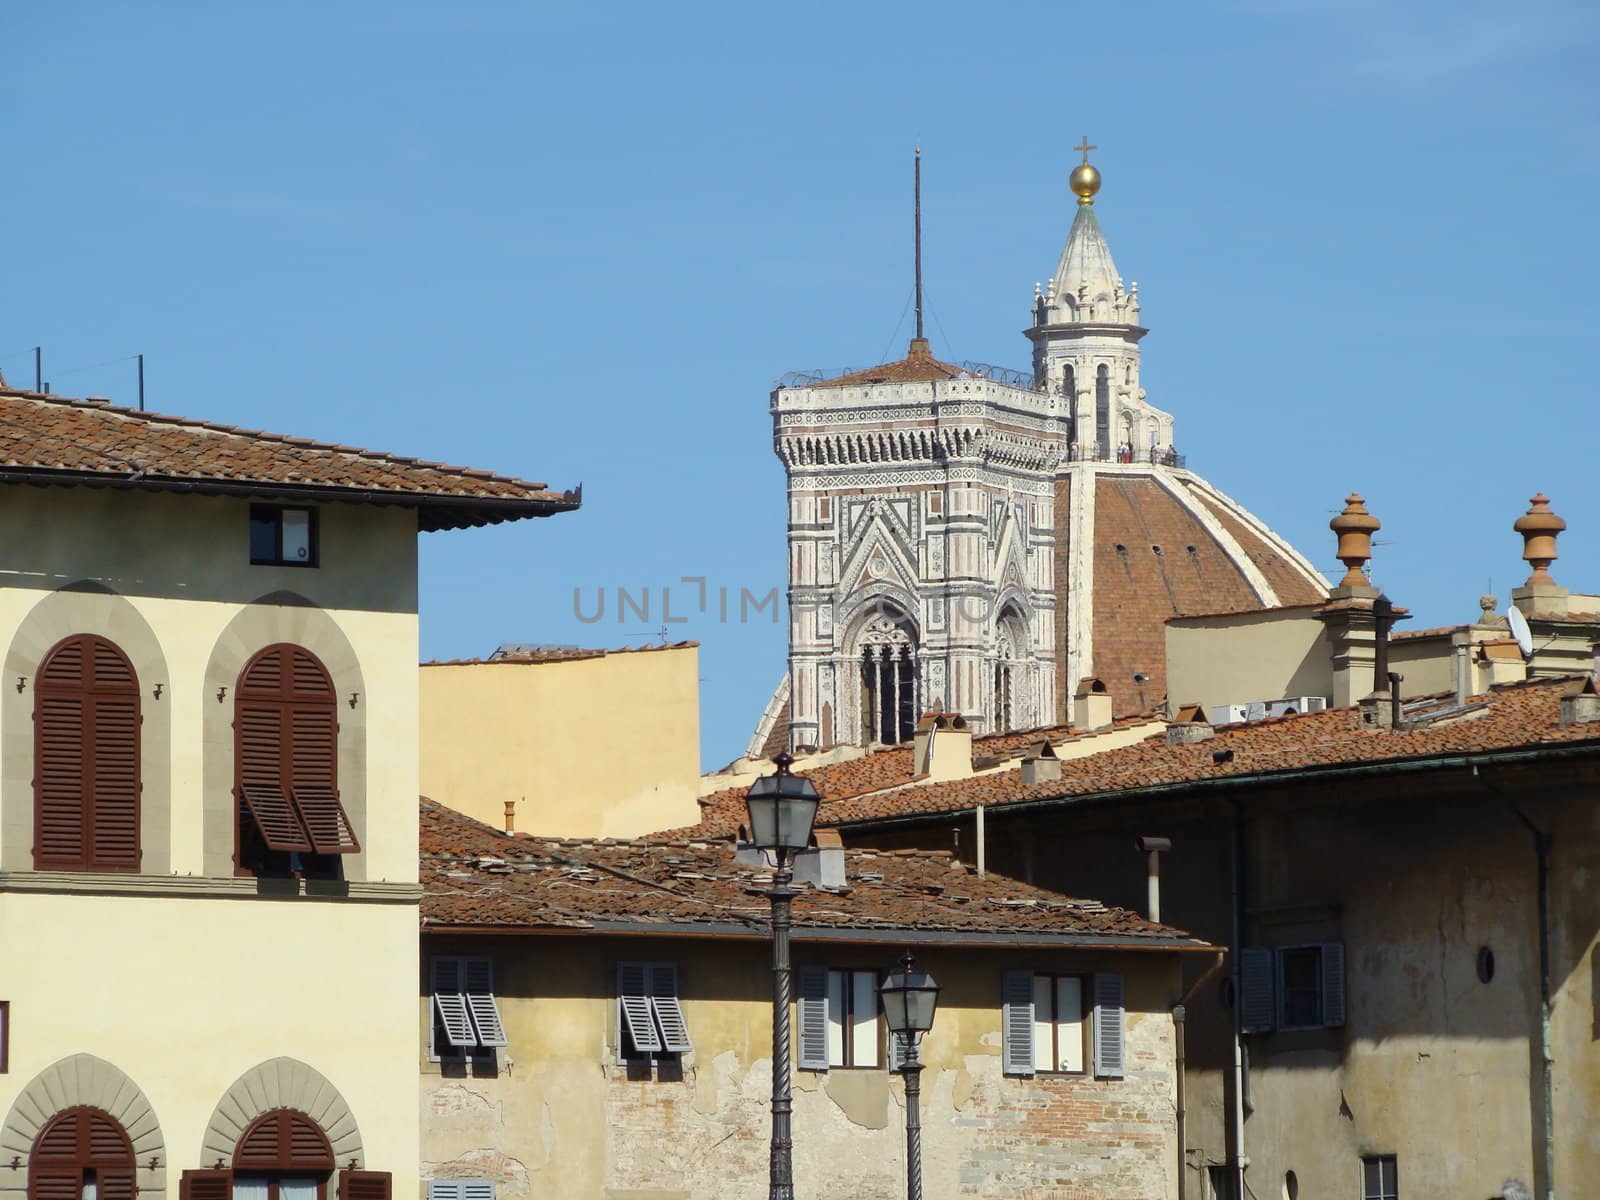 roofs of Florence, palaces in front of the Palazzo Pitti, campanile of Giotto end cupola of the cathedral, Firenze, Tuscany, Italy.